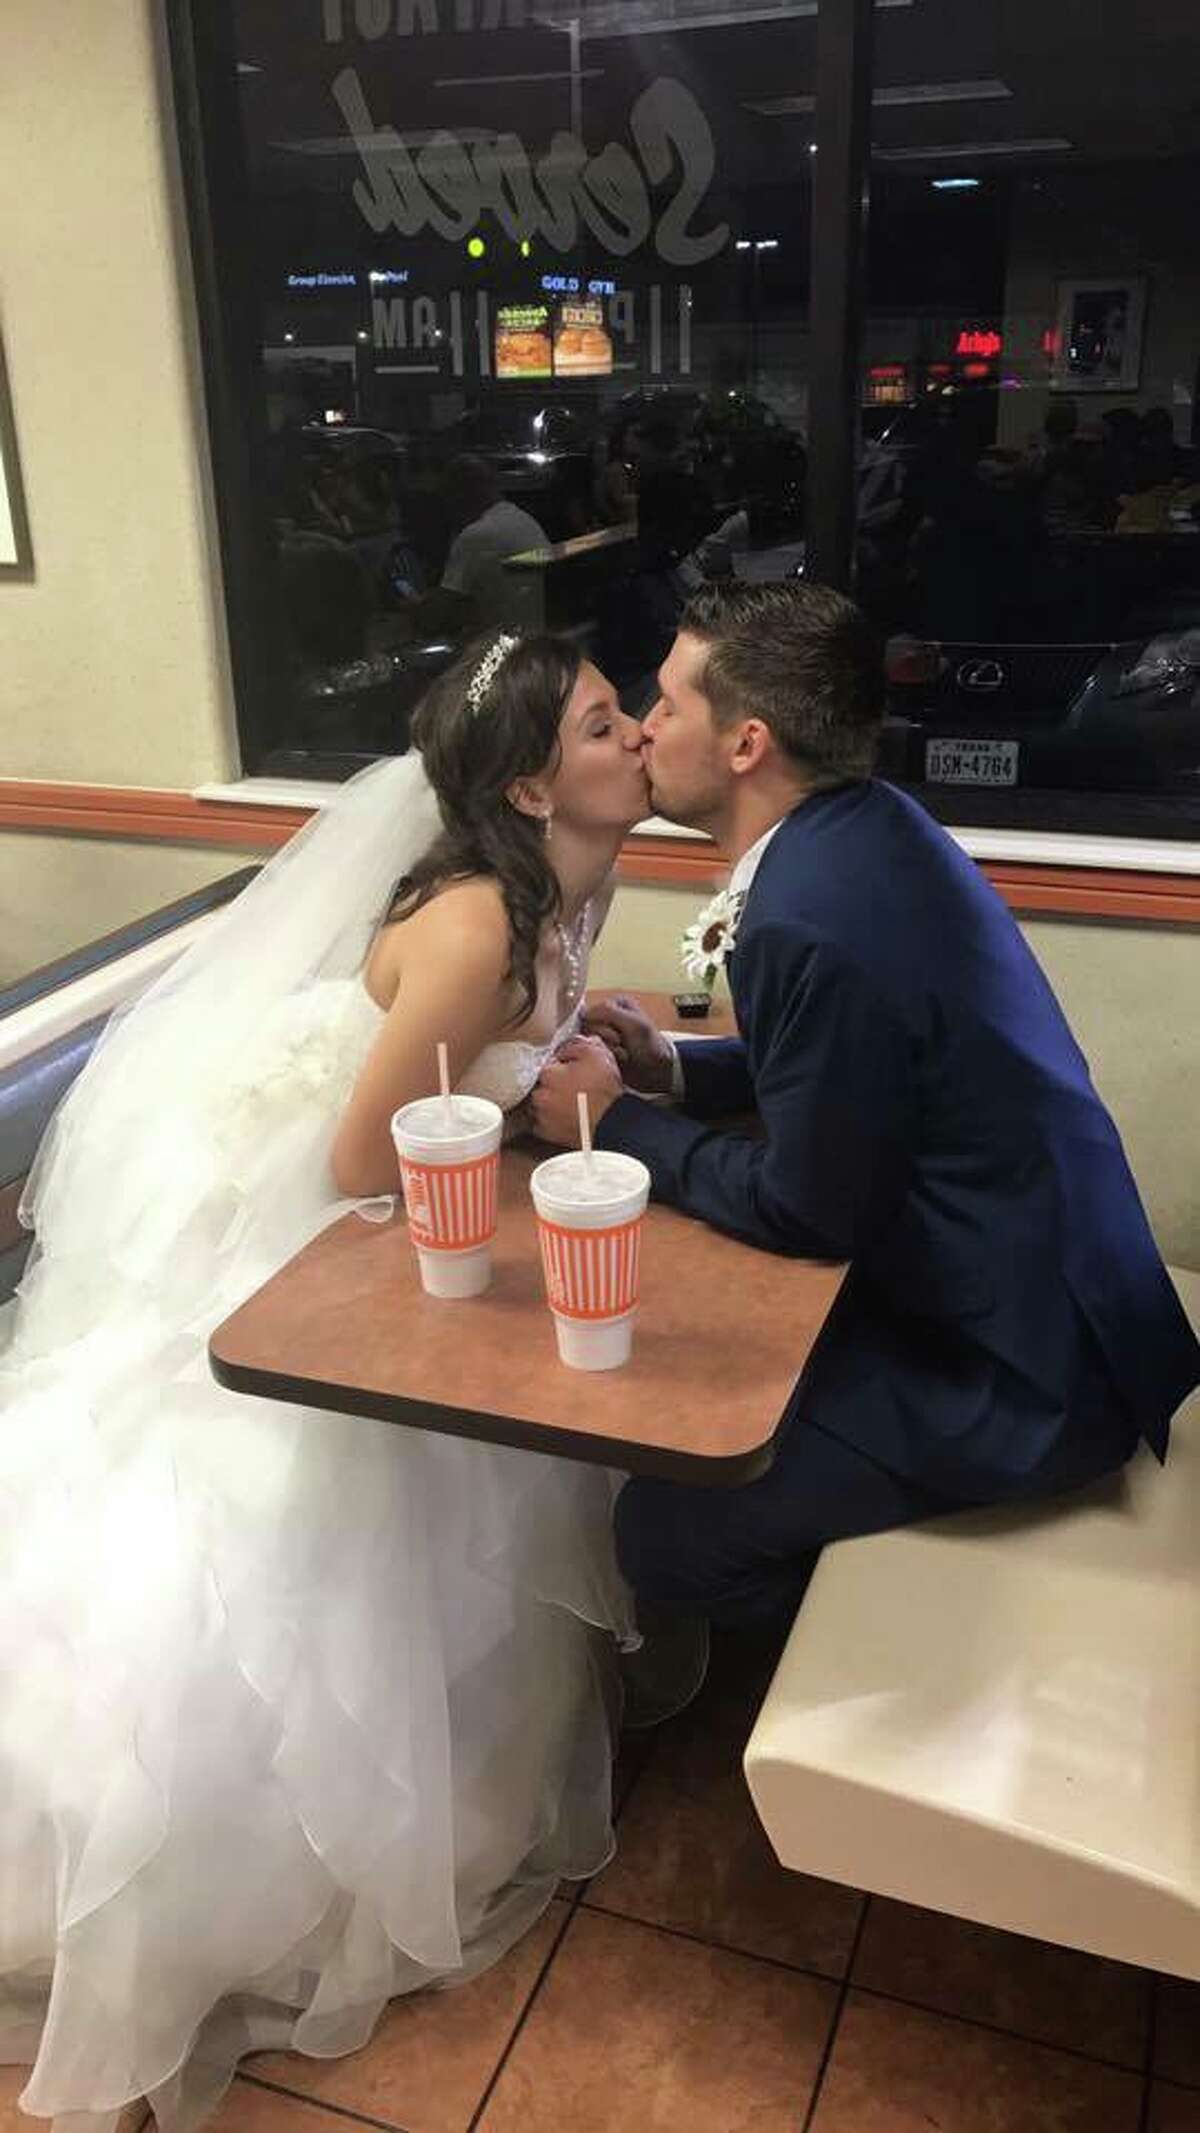 Newlyweds Rebekah and Tim Muenzler tied the knot — and became Twitter hits — last Saturday. The two got married in the Hill Country, then stopped by an Alamo City Whataburger for a midnight snack. Unbeknownst to them, the teen paparazzi was waiting to make them famous on Twitter.